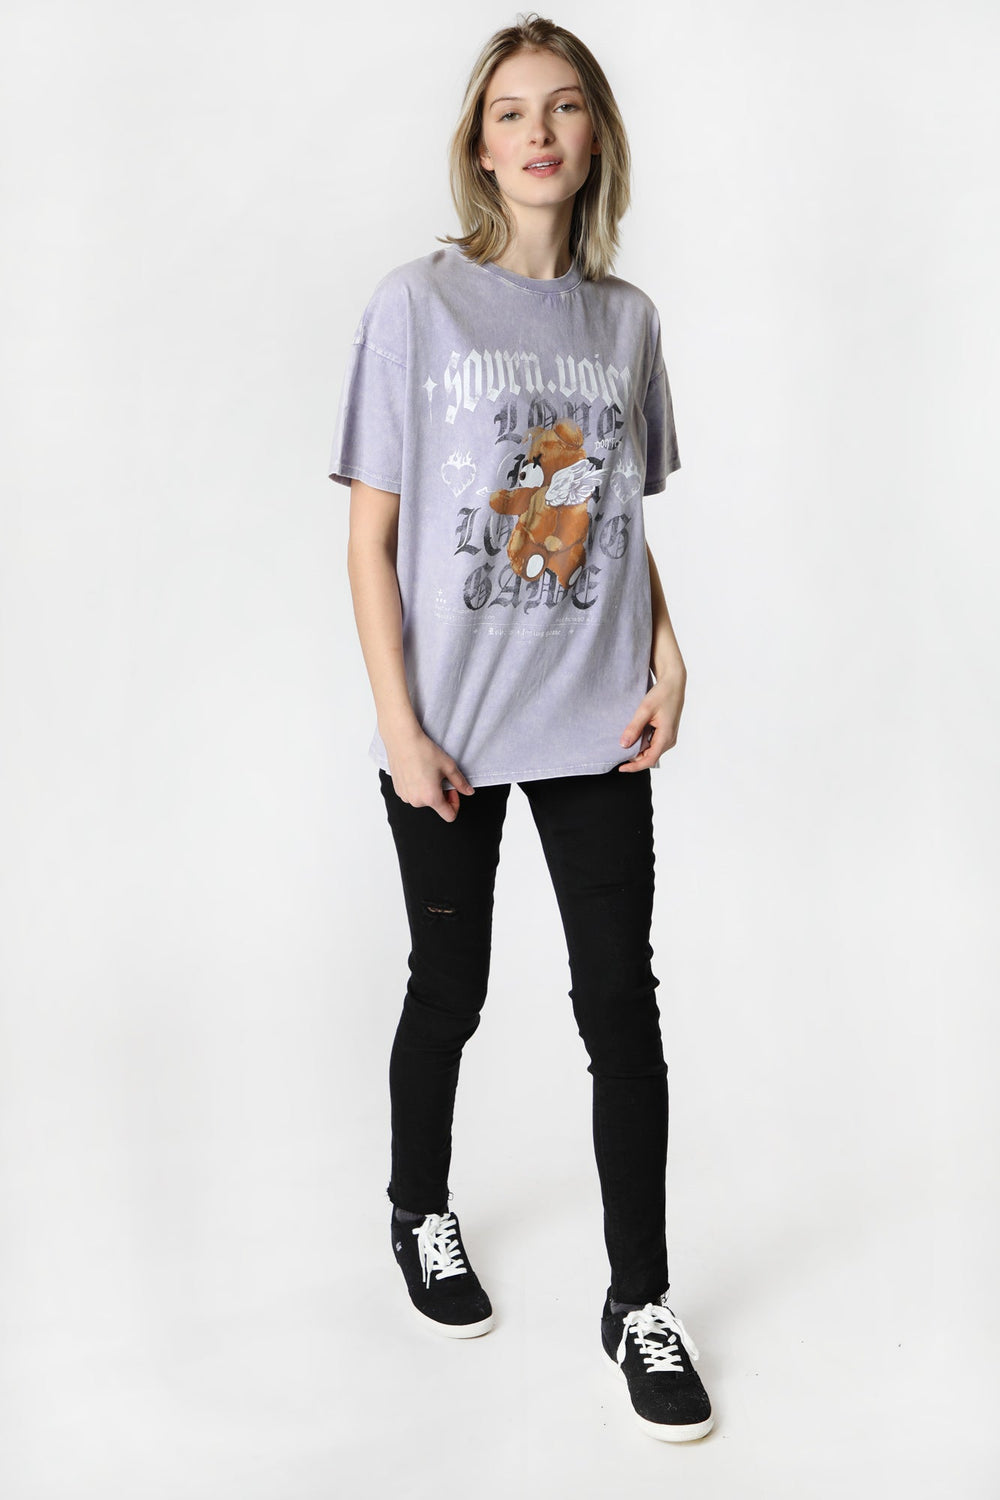 Womens Sovrn Voices Oversized Teddy Bear T-Shirt Womens Sovrn Voices Oversized Teddy Bear T-Shirt